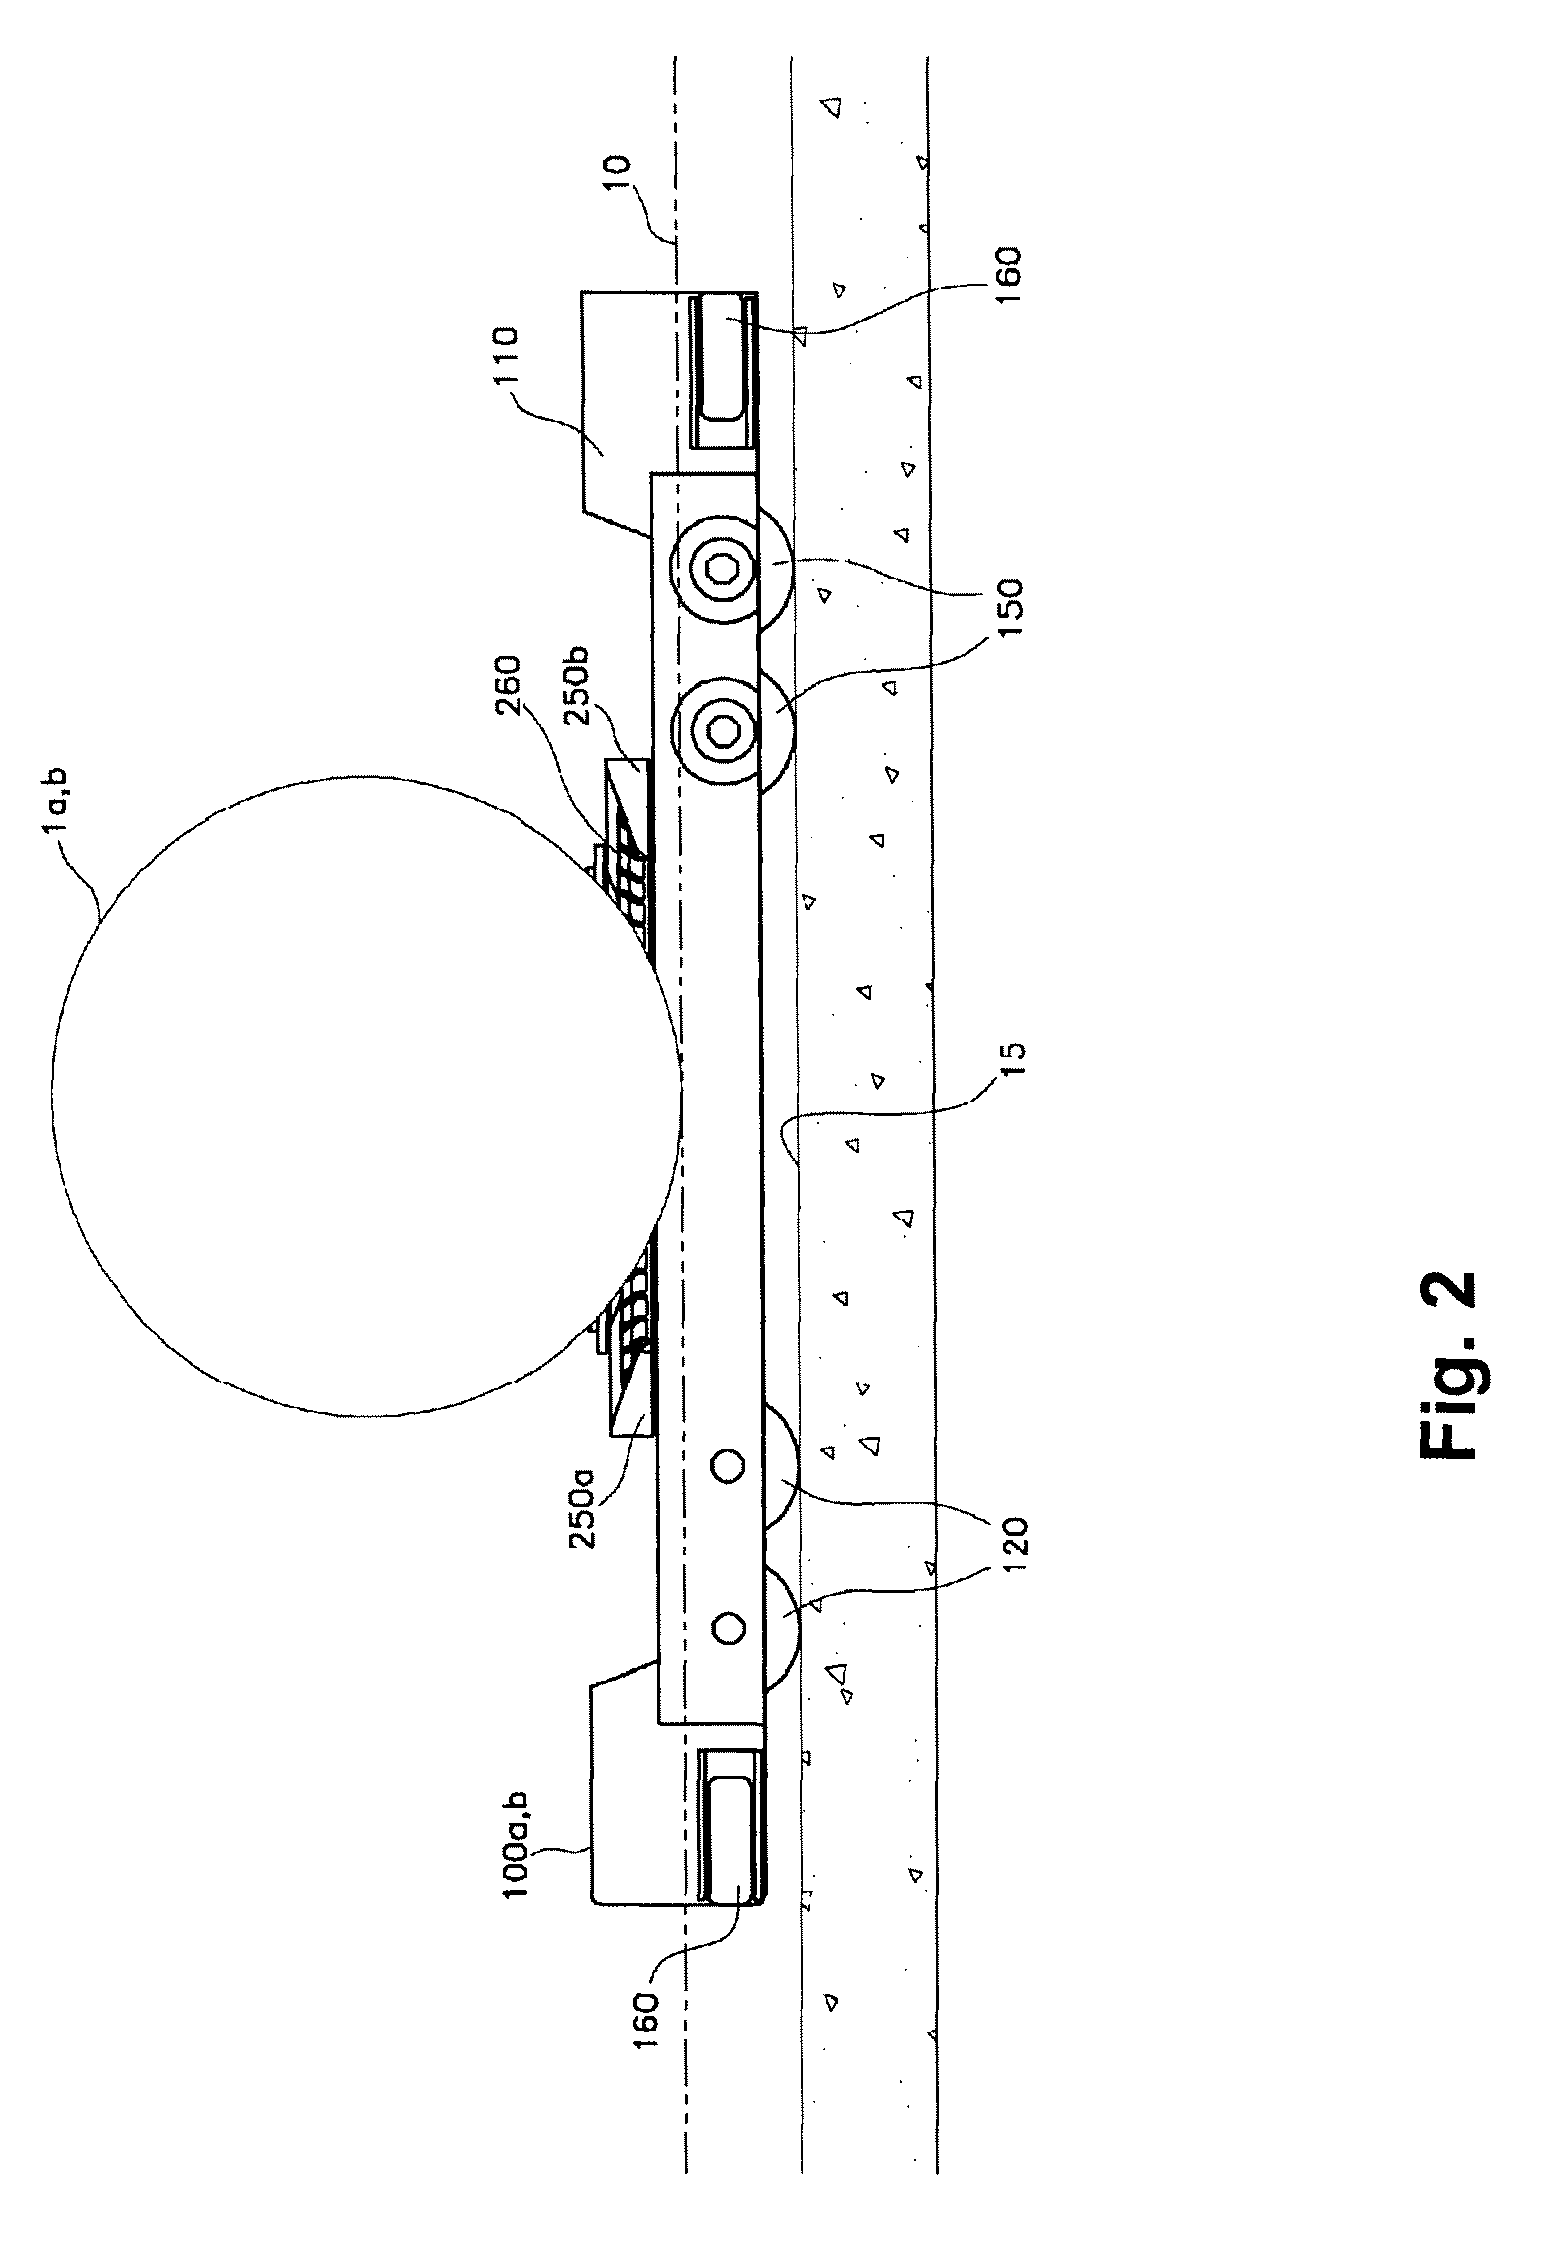 Apparatus for transporting a motor vehicle in a parking system